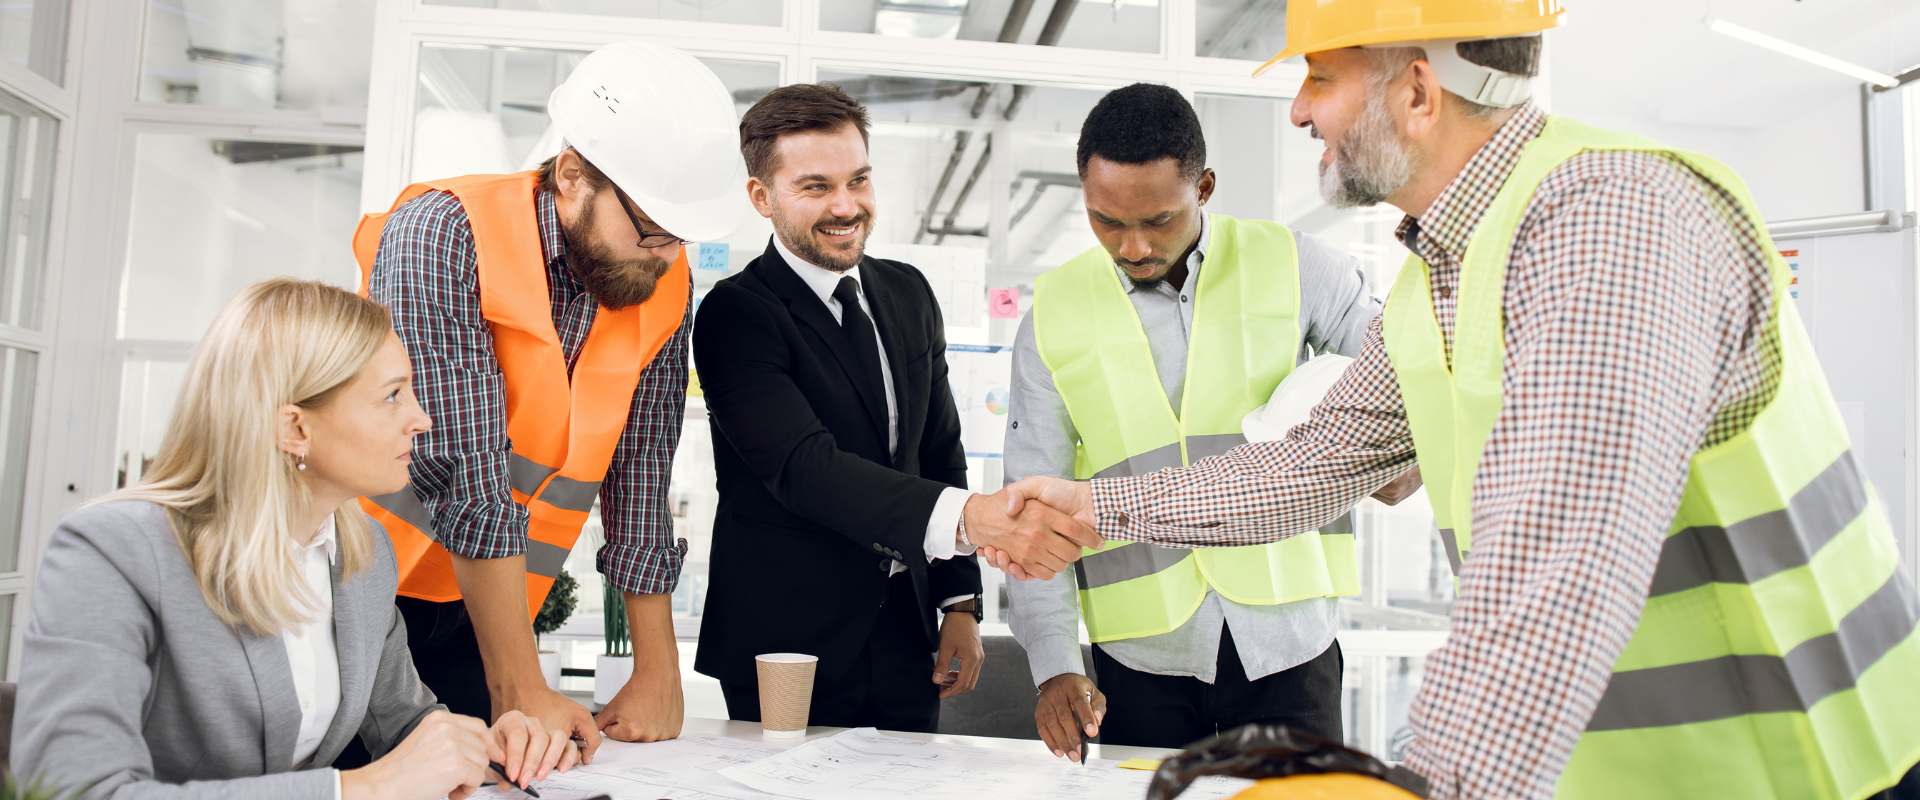 Business professional shakes hand with construction worker